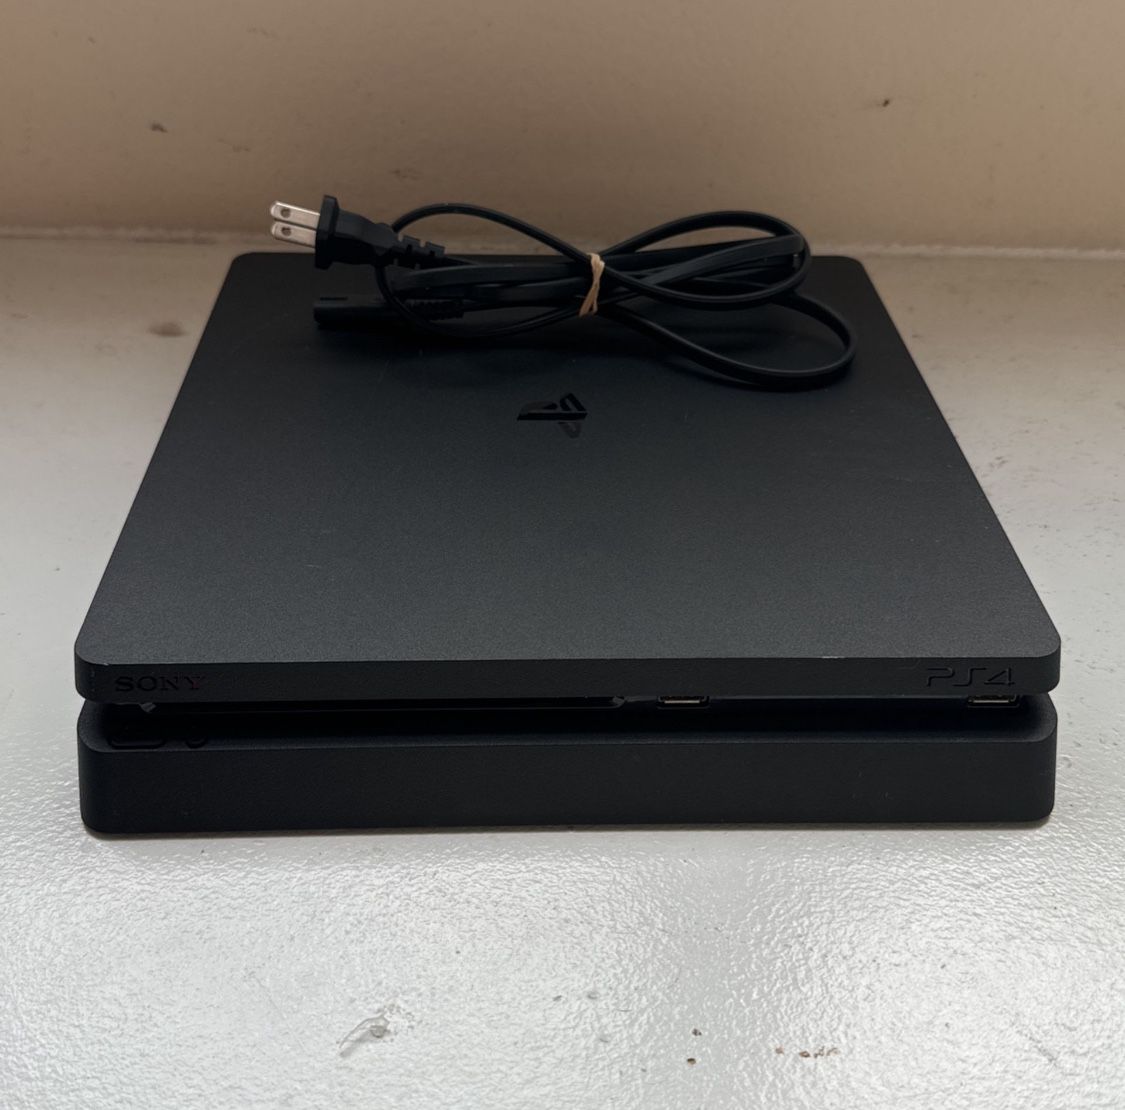 Ps4 Slim With Power Cord 